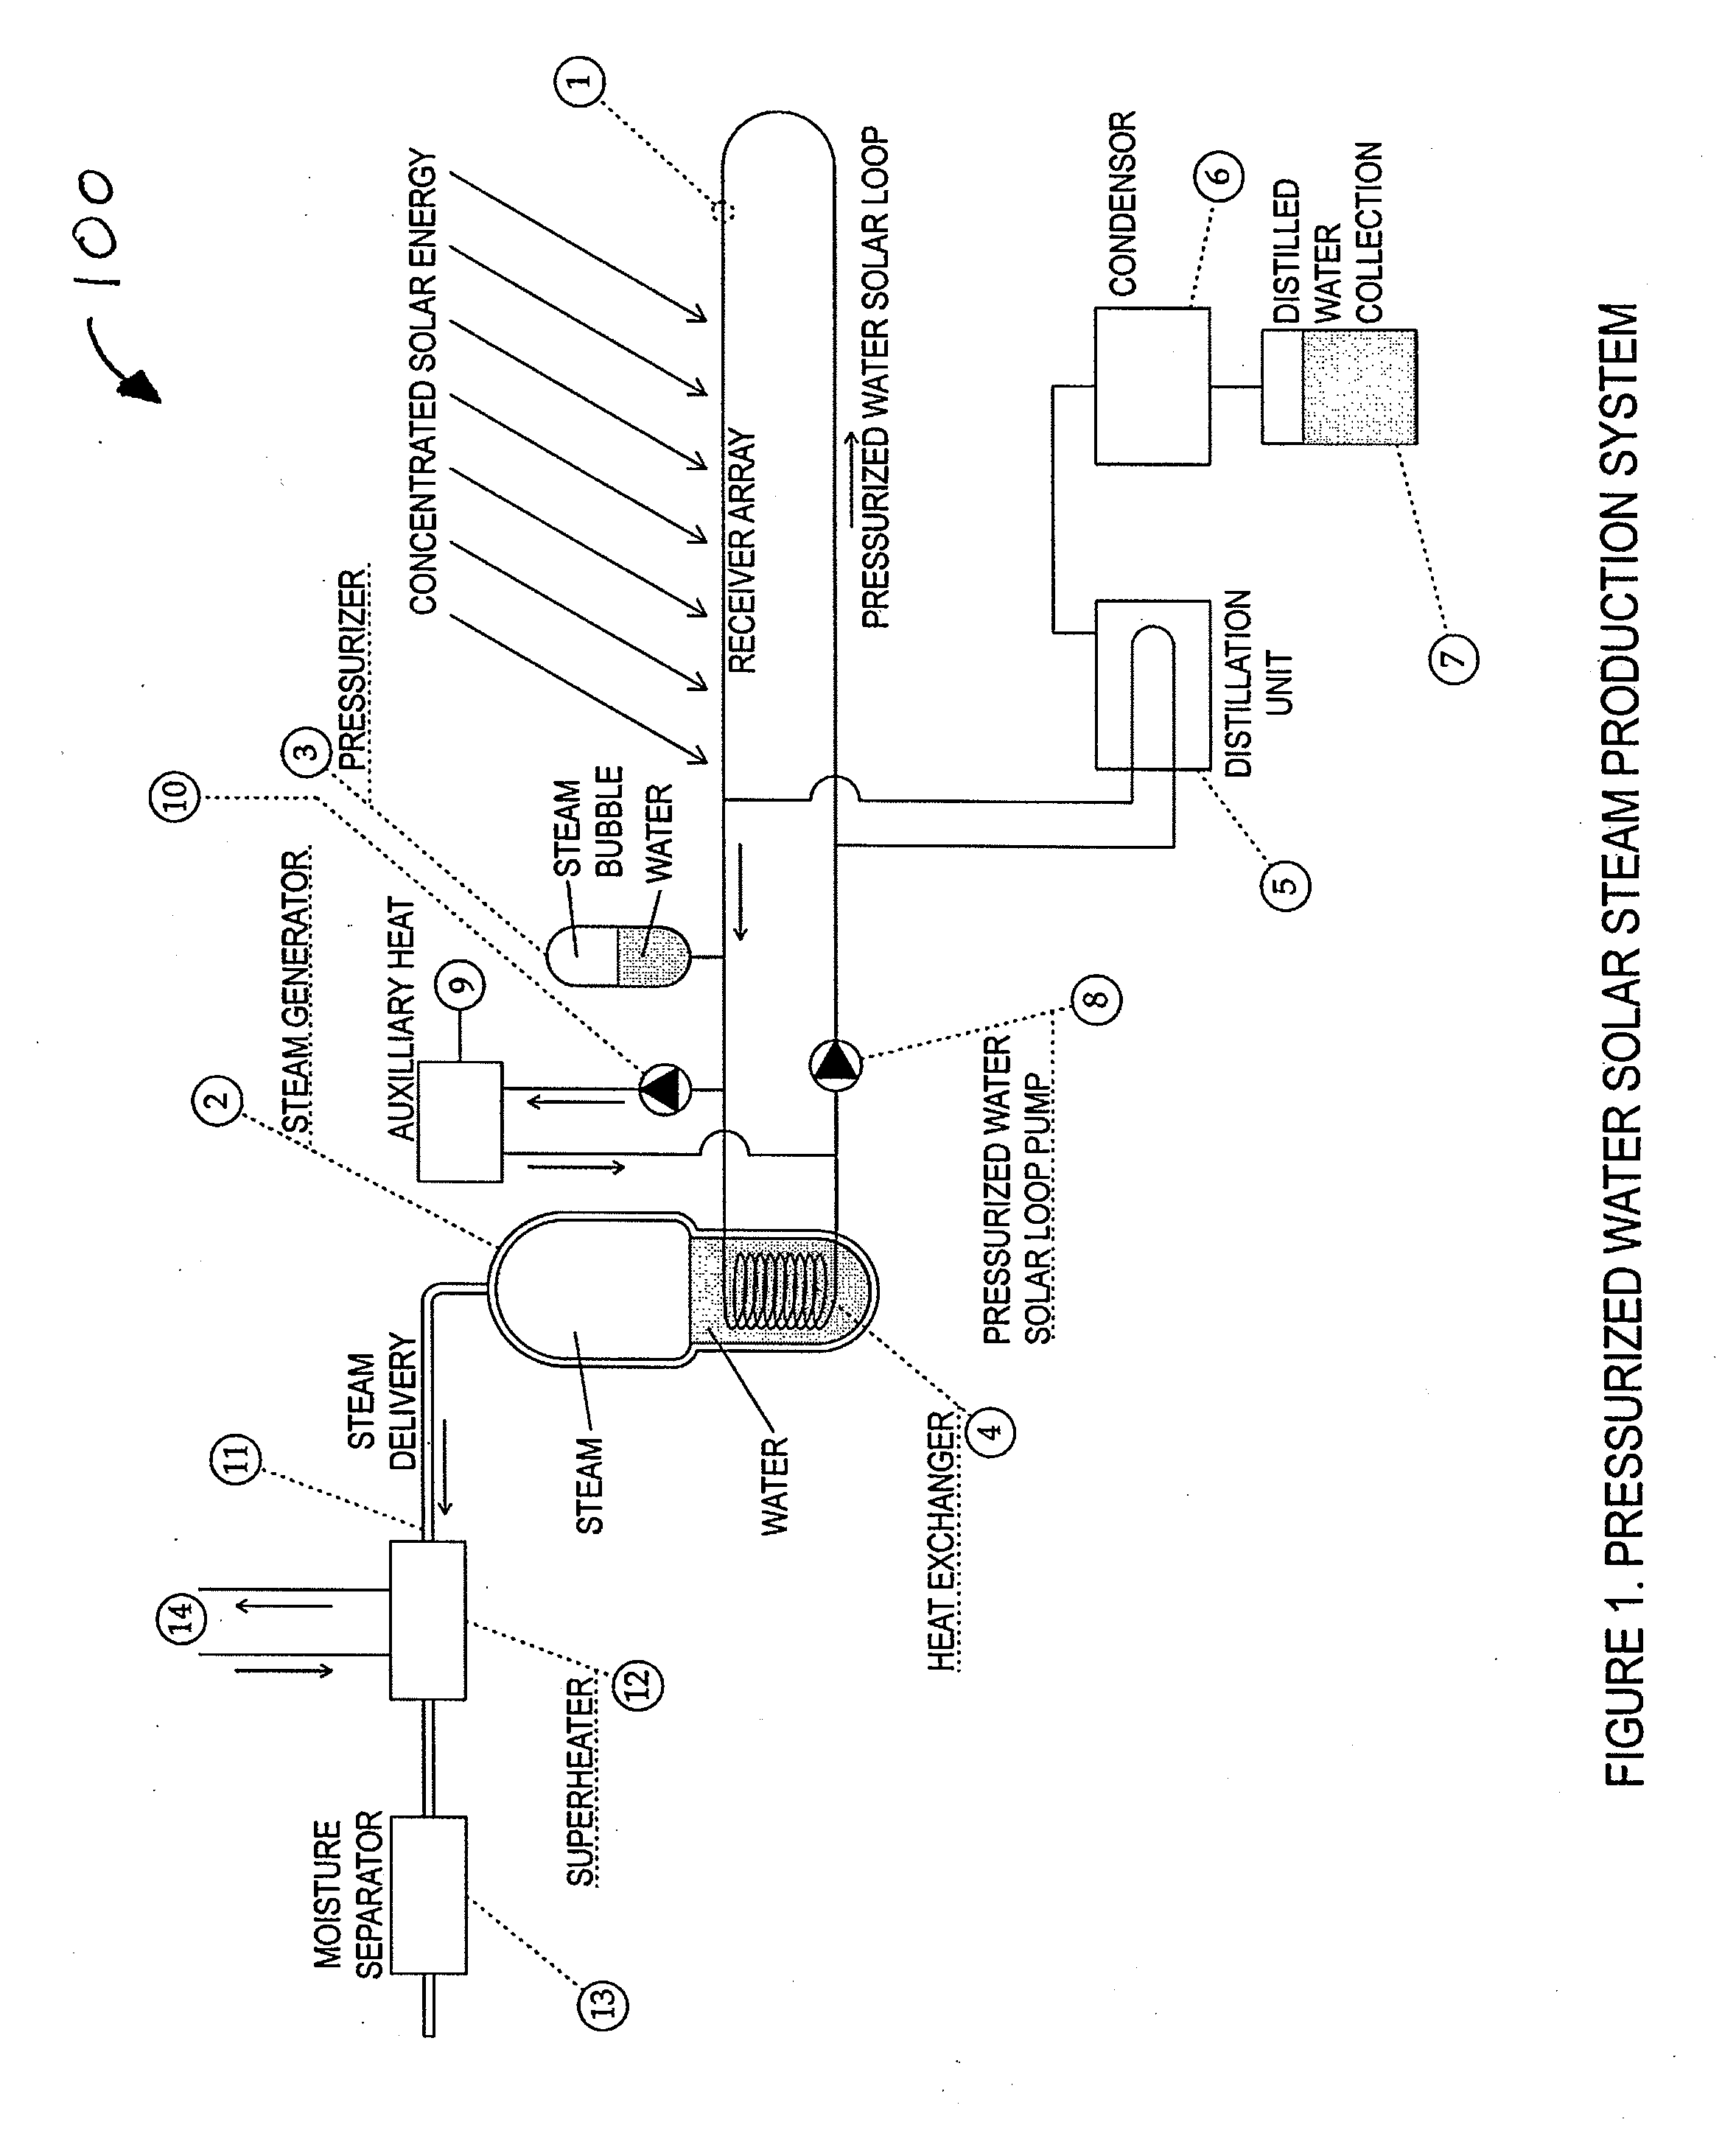 System and Method for Generating Steam Using a Solar Power Source in Conjunction with a Geothermal Power Source